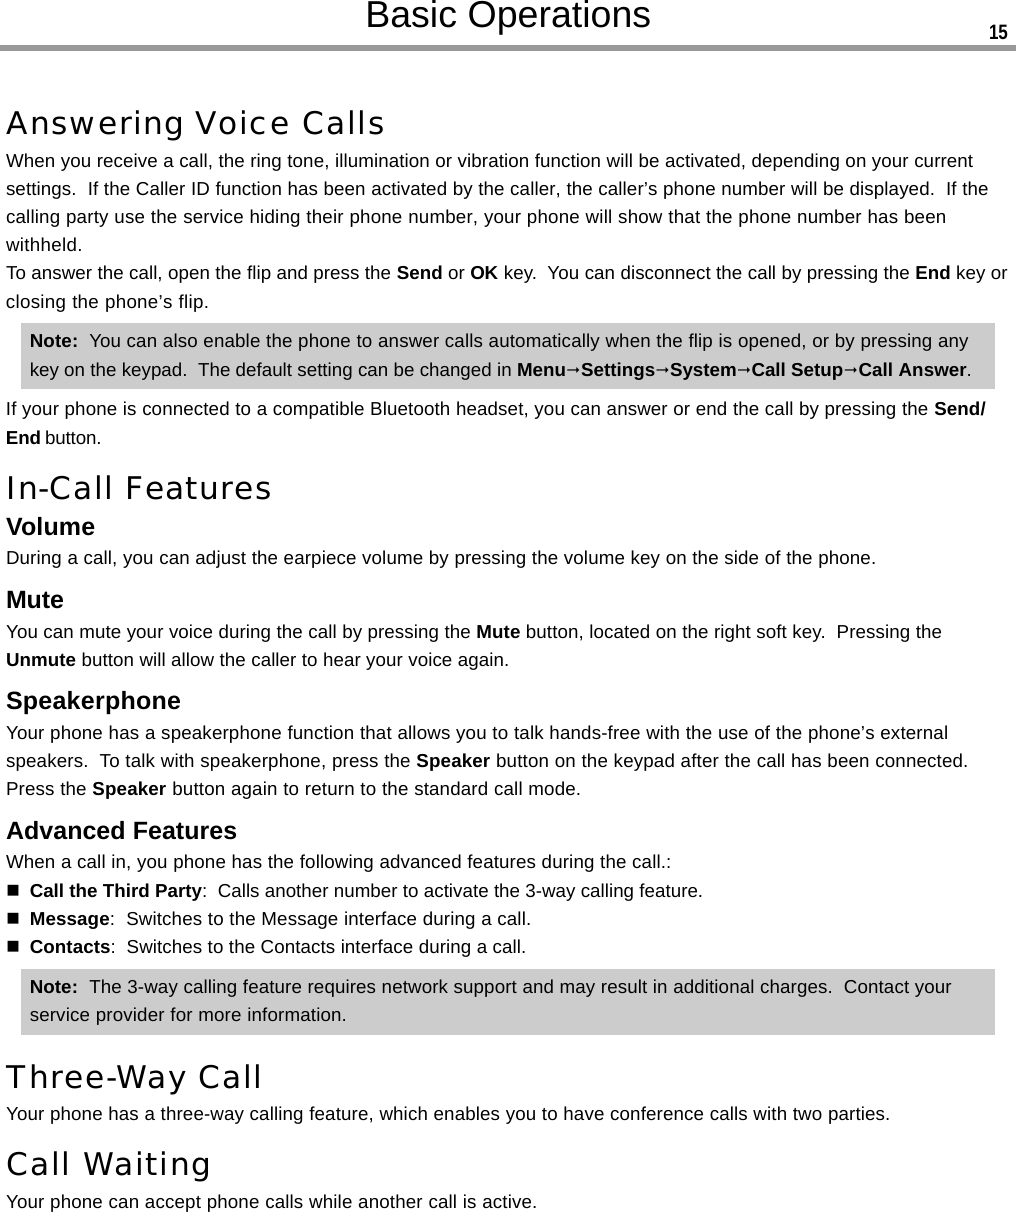 Answering Voice CallsWhen you receive a call, the ring tone, illumination or vibration function will be activated, depending on your currentsettings.  If the Caller ID function has been activated by the caller, the caller’s phone number will be displayed.  If thecalling party use the service hiding their phone number, your phone will show that the phone number has beenwithheld.To answer the call, open the flip and press the Send or OK key.  You can disconnect the call by pressing the End key orclosing the phone’s flip.Note:  You can also enable the phone to answer calls automatically when the flip is opened, or by pressing anykey on the keypad.  The default setting can be changed in MenuSettingsSystemCall SetupCall Answer.If your phone is connected to a compatible Bluetooth headset, you can answer or end the call by pressing the Send/End button.In-Call FeaturesVolumeDuring a call, you can adjust the earpiece volume by pressing the volume key on the side of the phone.MuteYou can mute your voice during the call by pressing the Mute button, located on the right soft key.  Pressing theUnmute button will allow the caller to hear your voice again.SpeakerphoneYour phone has a speakerphone function that allows you to talk hands-free with the use of the phone’s externalspeakers.  To talk with speakerphone, press the Speaker button on the keypad after the call has been connected.Press the Speaker button again to return to the standard call mode.Advanced FeaturesWhen a call in, you phone has the following advanced features during the call.:Call the Third Party:  Calls another number to activate the 3-way calling feature.Message:  Switches to the Message interface during a call.Contacts:  Switches to the Contacts interface during a call.Note:  The 3-way calling feature requires network support and may result in additional charges.  Contact yourservice provider for more information.Three-Way CallYour phone has a three-way calling feature, which enables you to have conference calls with two parties.Call WaitingYour phone can accept phone calls while another call is active.Basic Operations 15